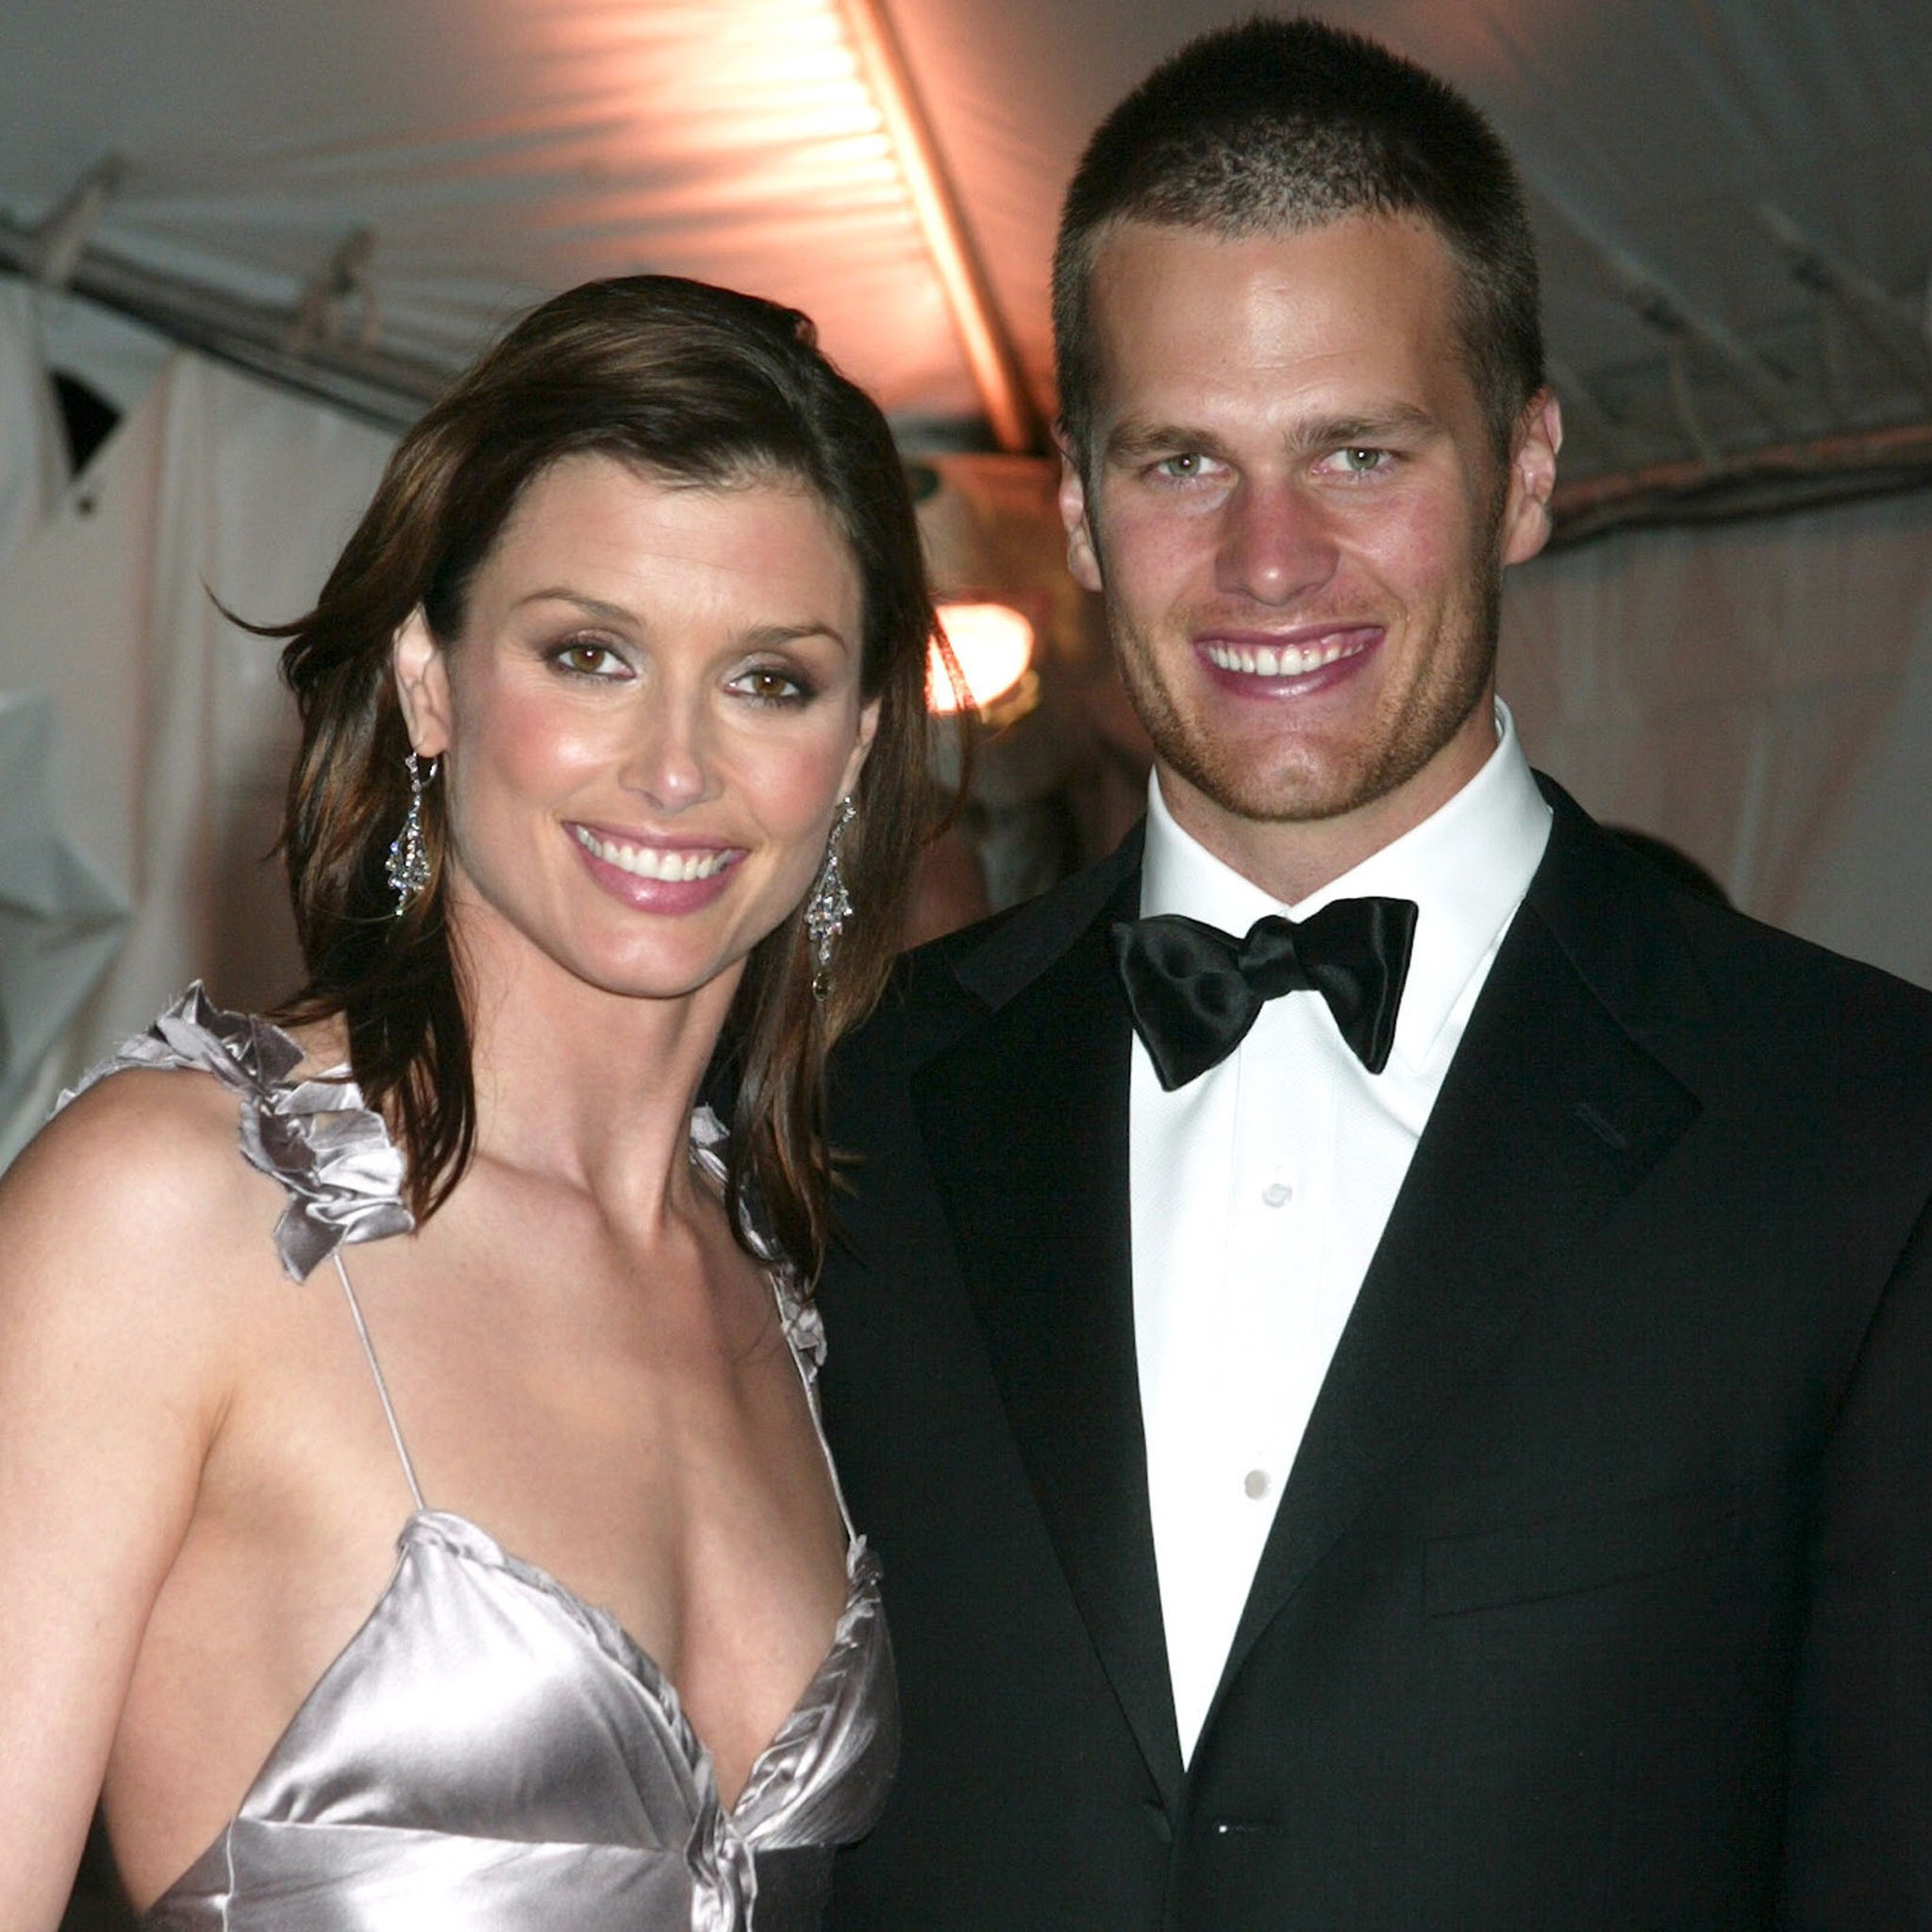 Bridget Moynahan Is 'So Proud' of Ex Tom Brady After His Retirement